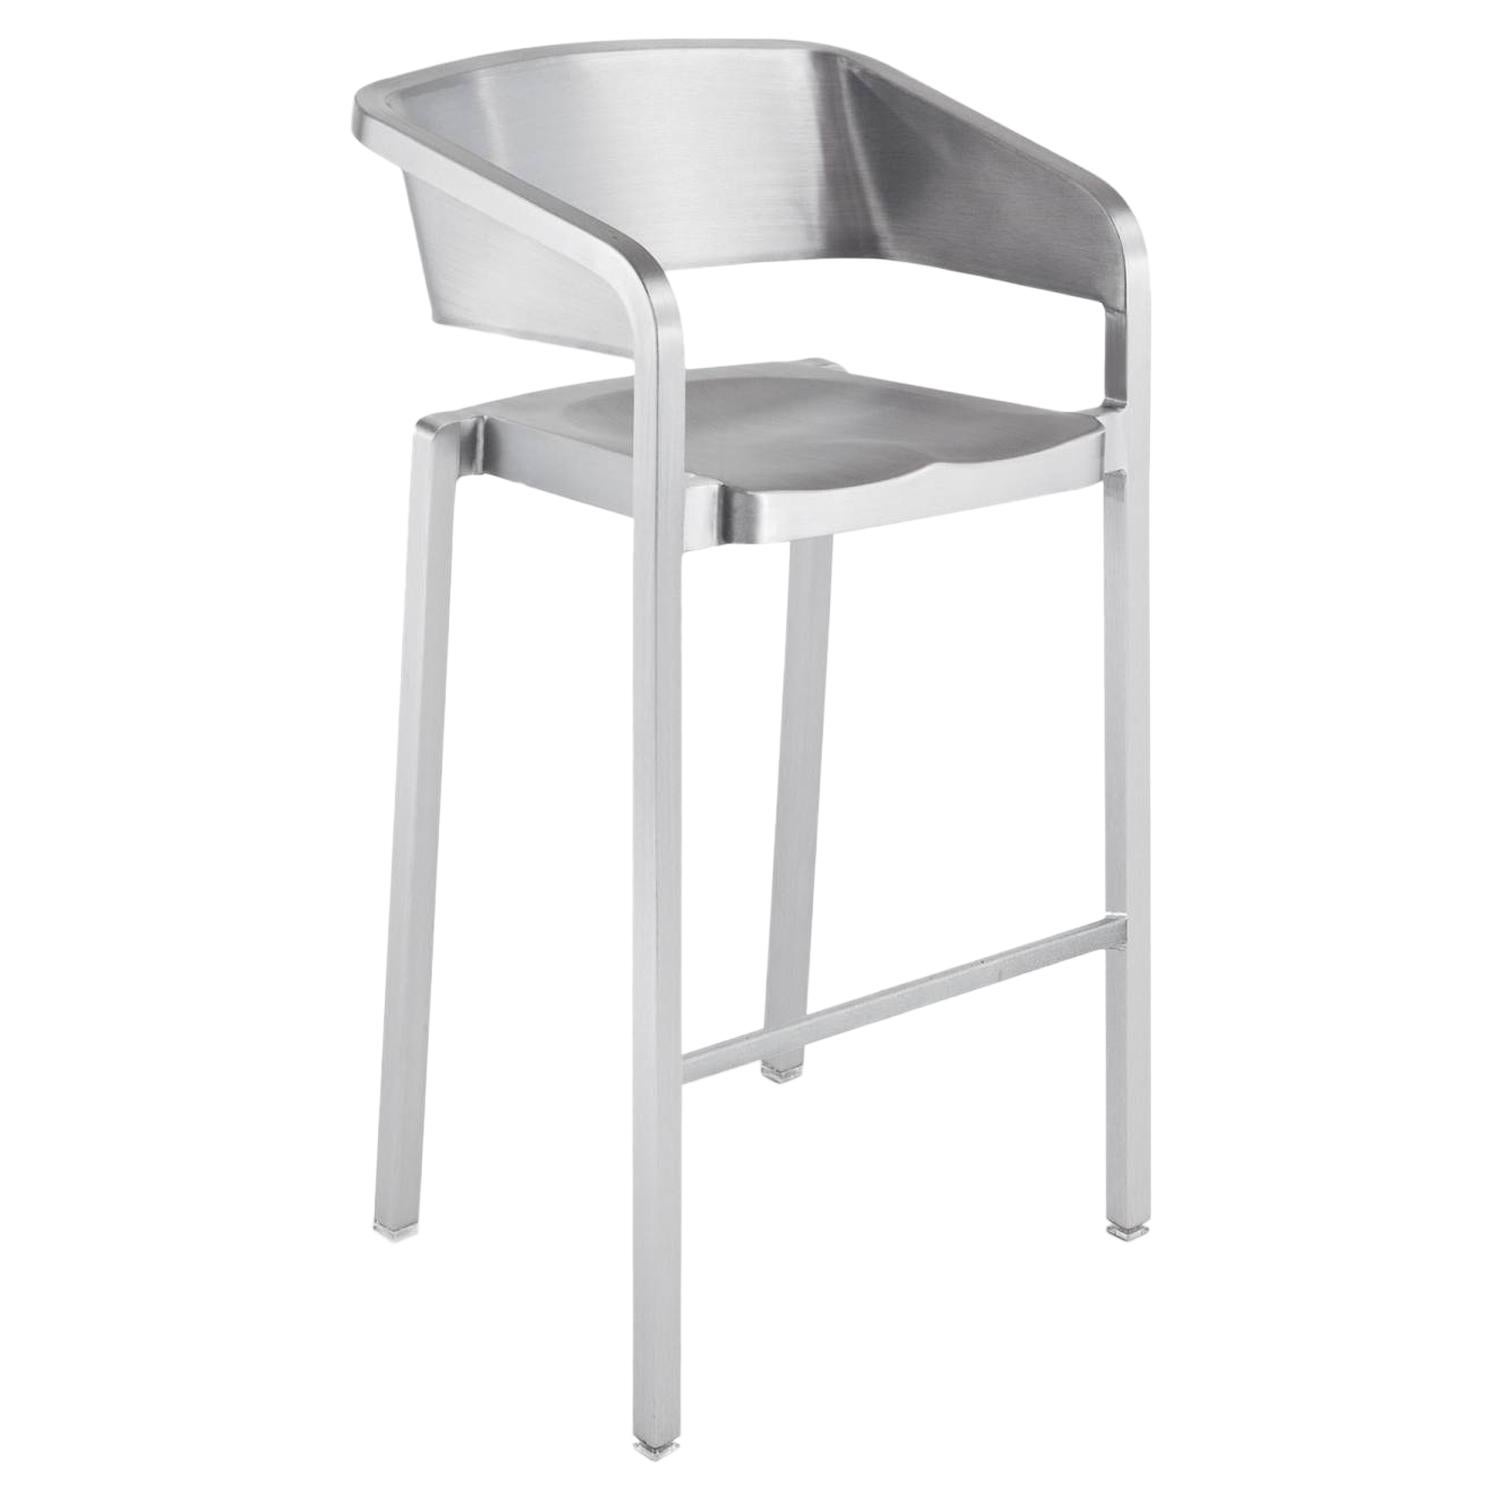 Emeco Soso Bar Stool in Brushed Aluminum by Jean Nouvel